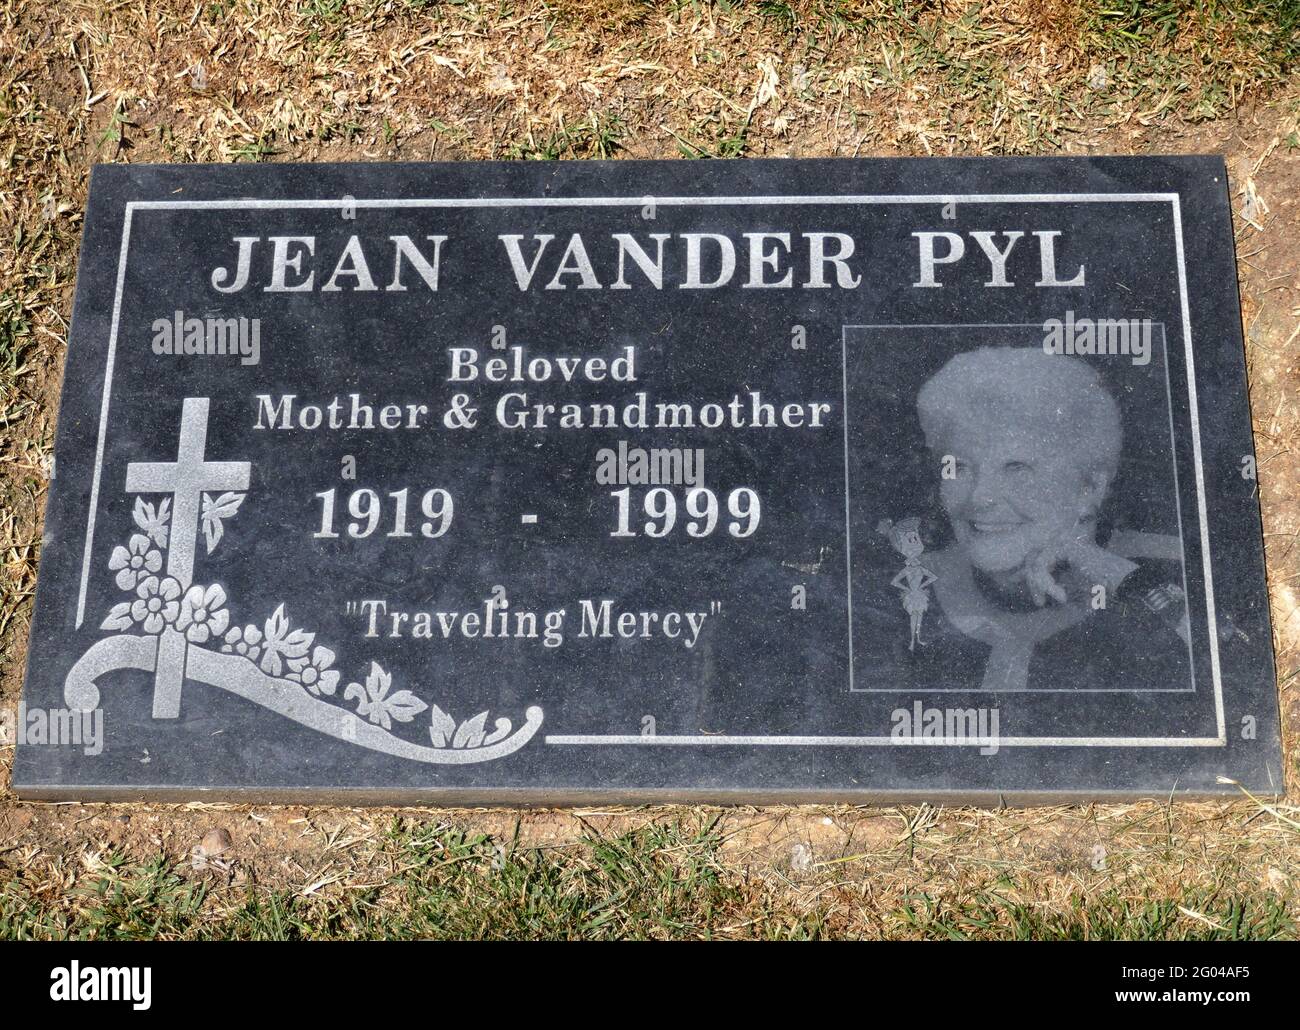 Lake Forest, California, USA 29th May 2021 A general view of atmosphere of actress Jean Vander Pyl's Grave at Ascension Cemetery in Lake Forest, California, USA. She was best known for the voice of Wilma Flintstone of the Hanna-Barbera Cartoon The Flintstones. Photo by Barry King/Alamy Stock Photo Stock Photo